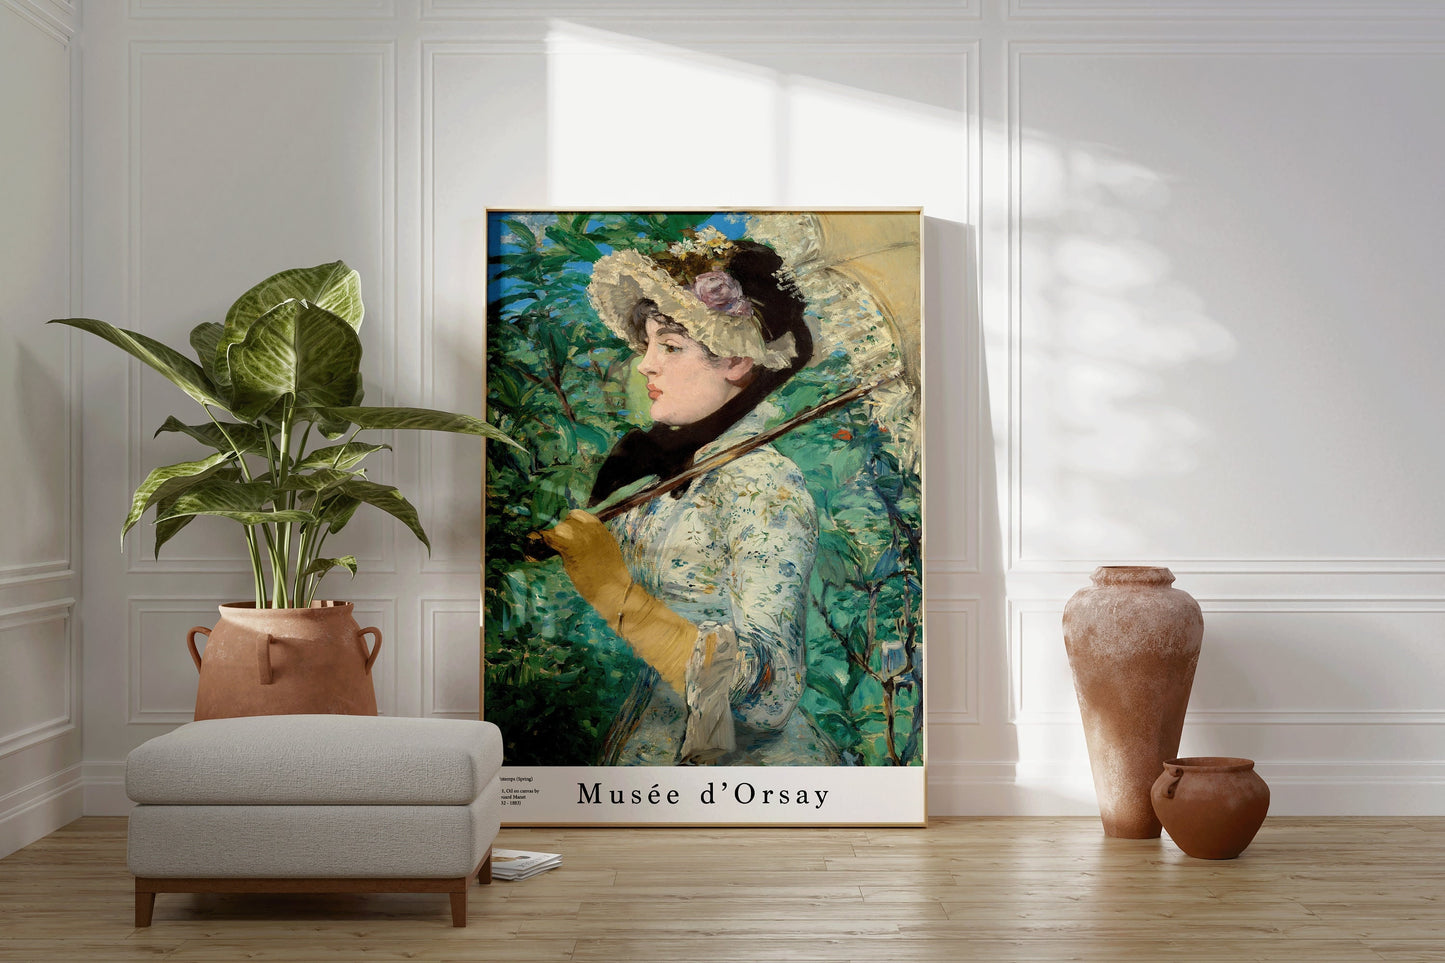 Manet Spring Painting Musee d'Orsay Museum Poster Fine Art Impressionist Painting Vintage Ready to hang Home Office Decor Gift Idea for her